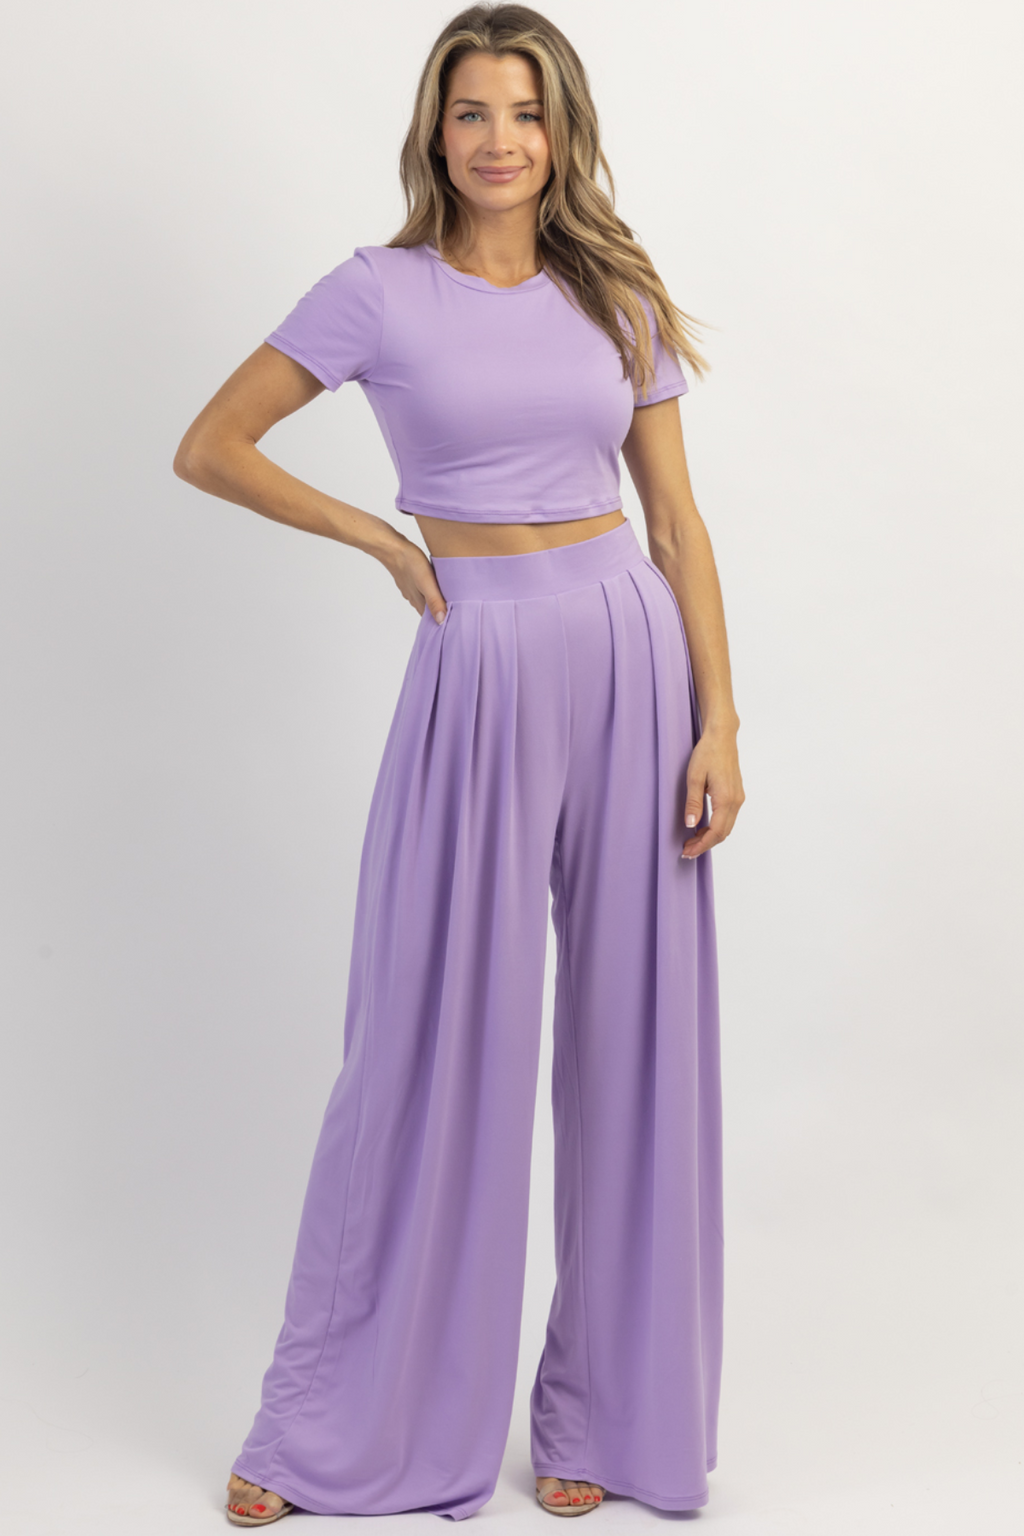 BUTTER SOFT LILAC PALAZZO PANT SET *RESTOCK COMING SOON*